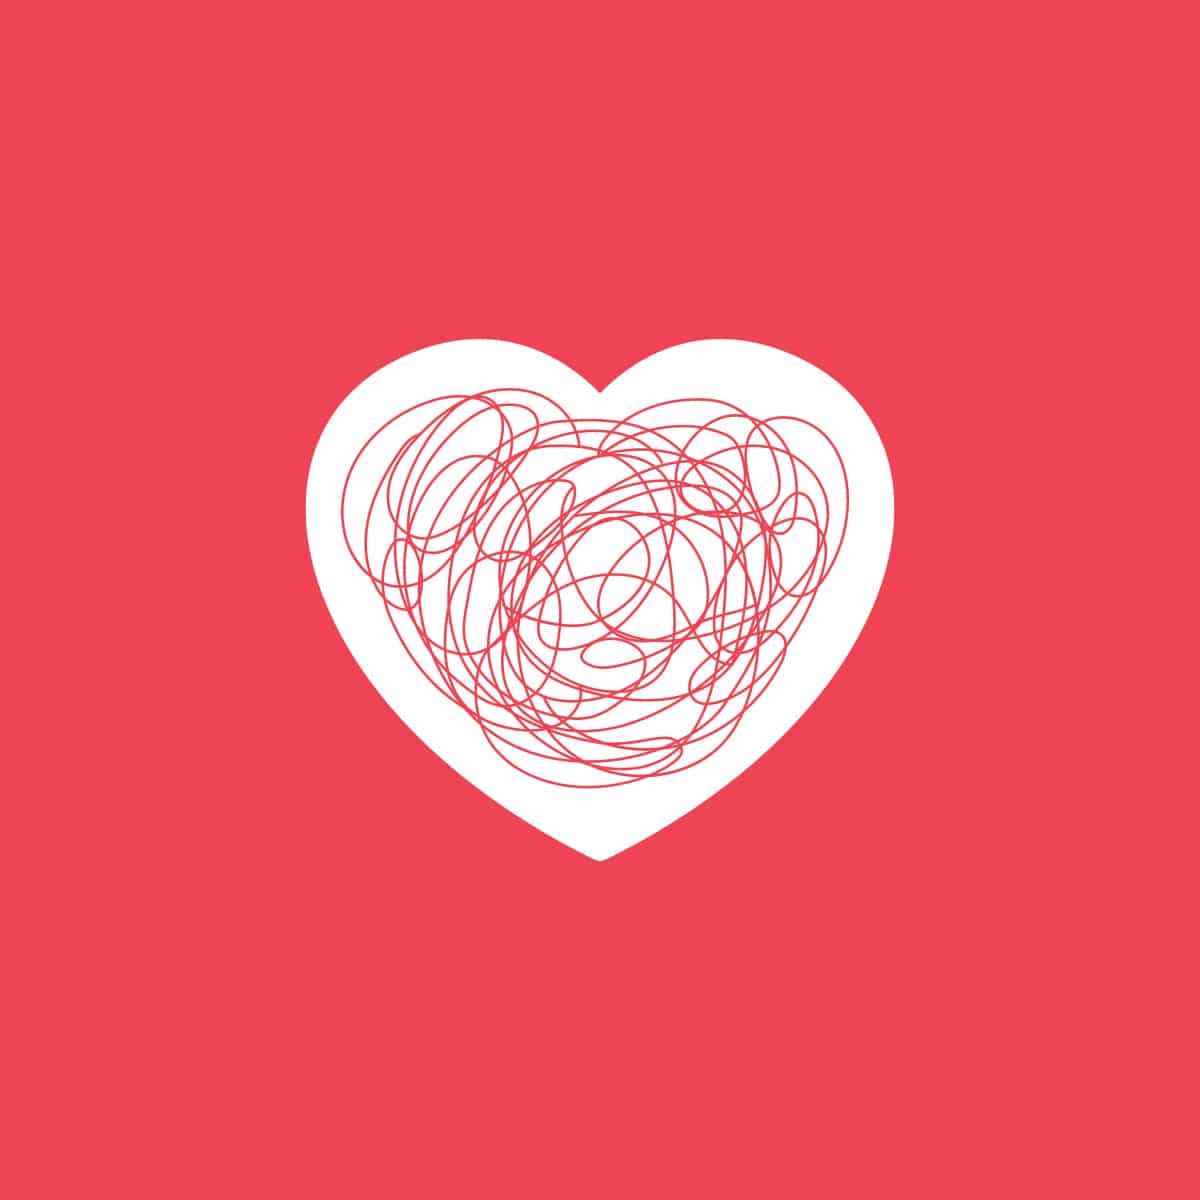 red heart full of scribbles with red background